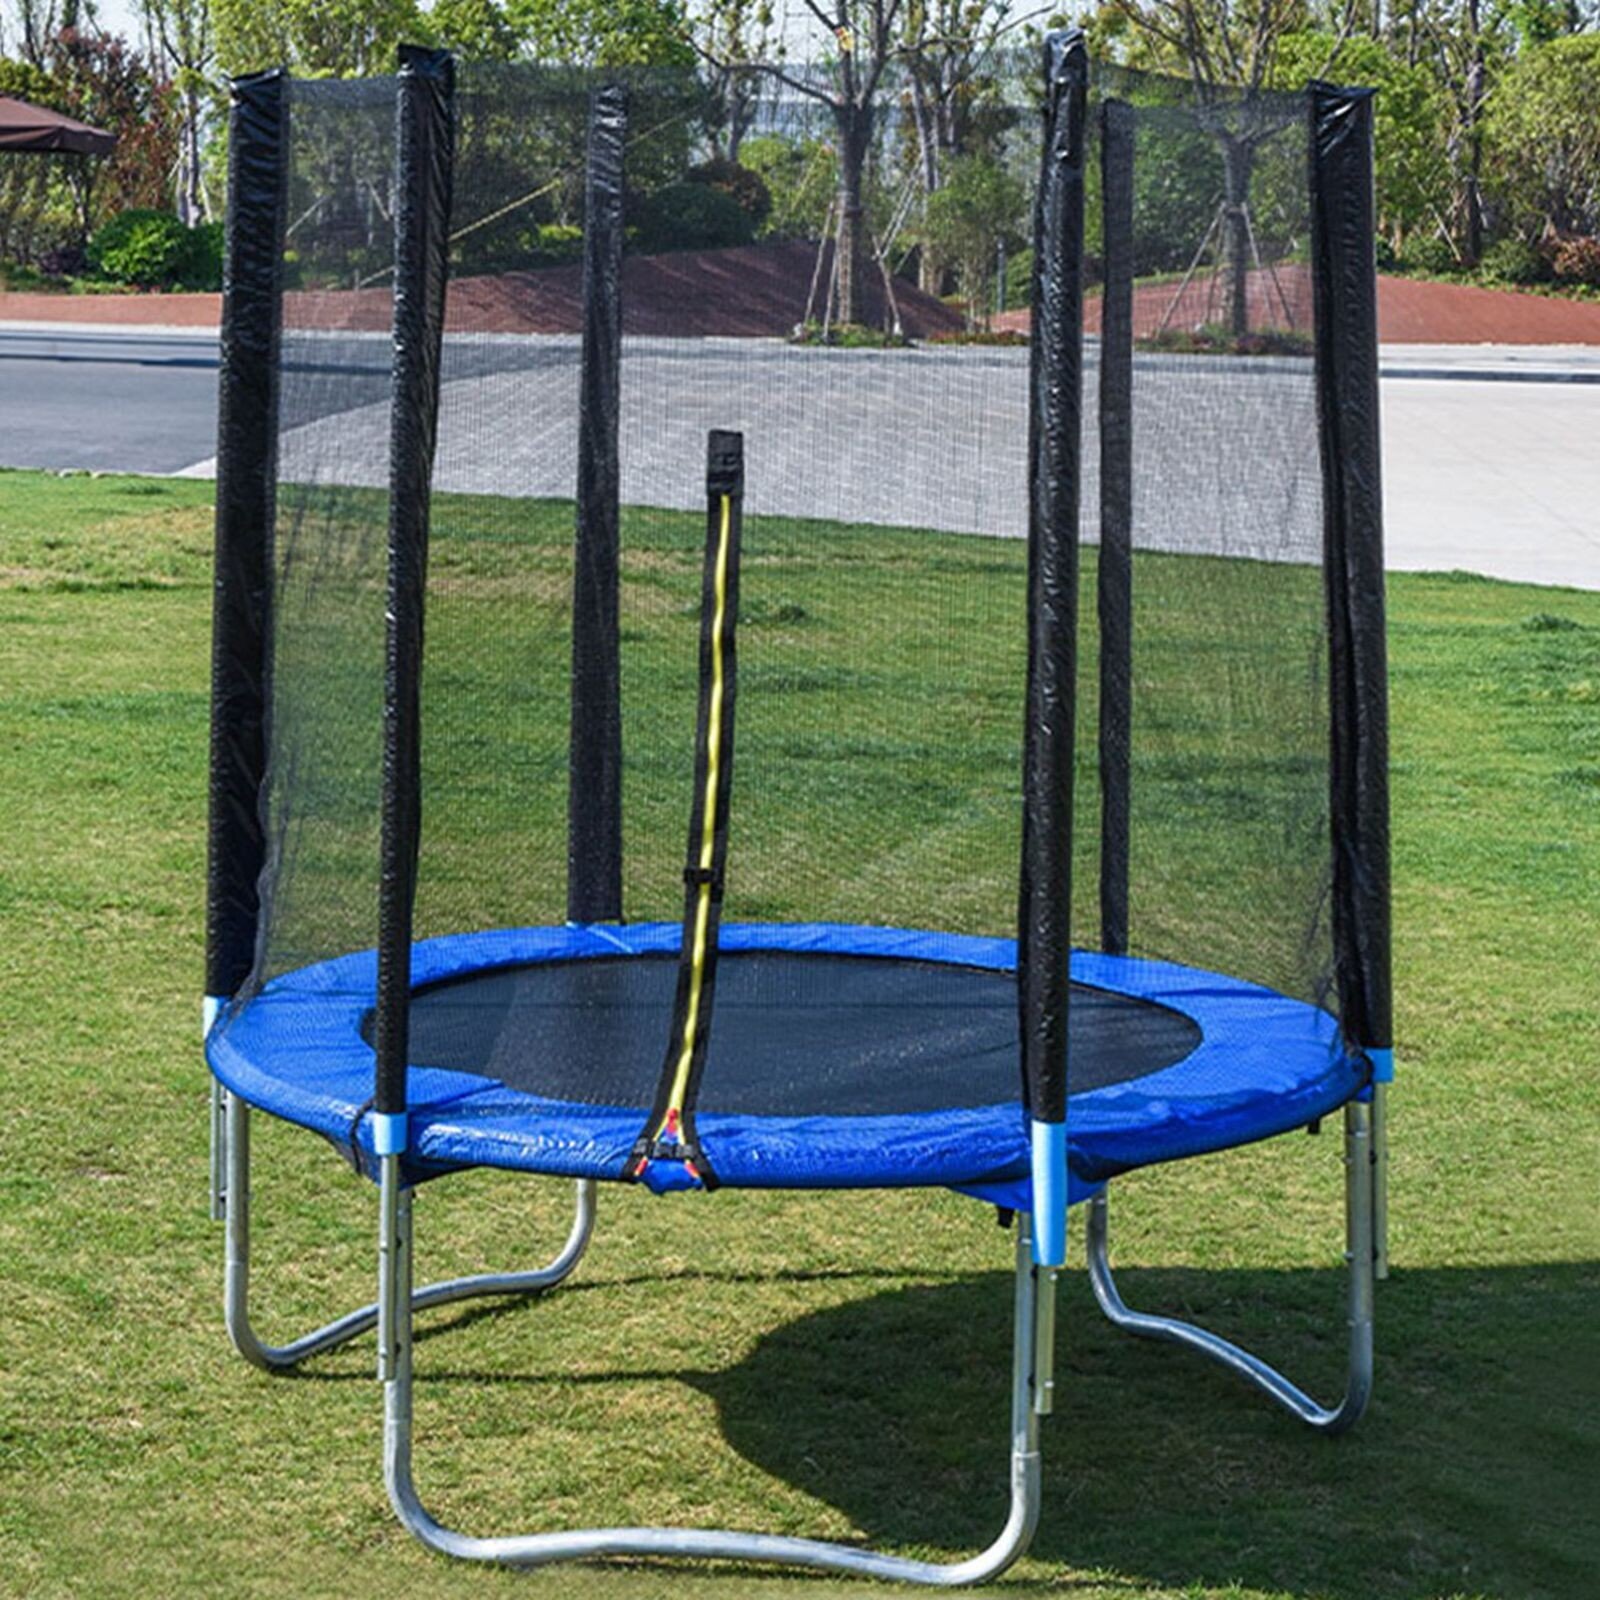 10 FT Kids Trampoline With Enclosure Net Jumping Mat And Spring Cover Padding